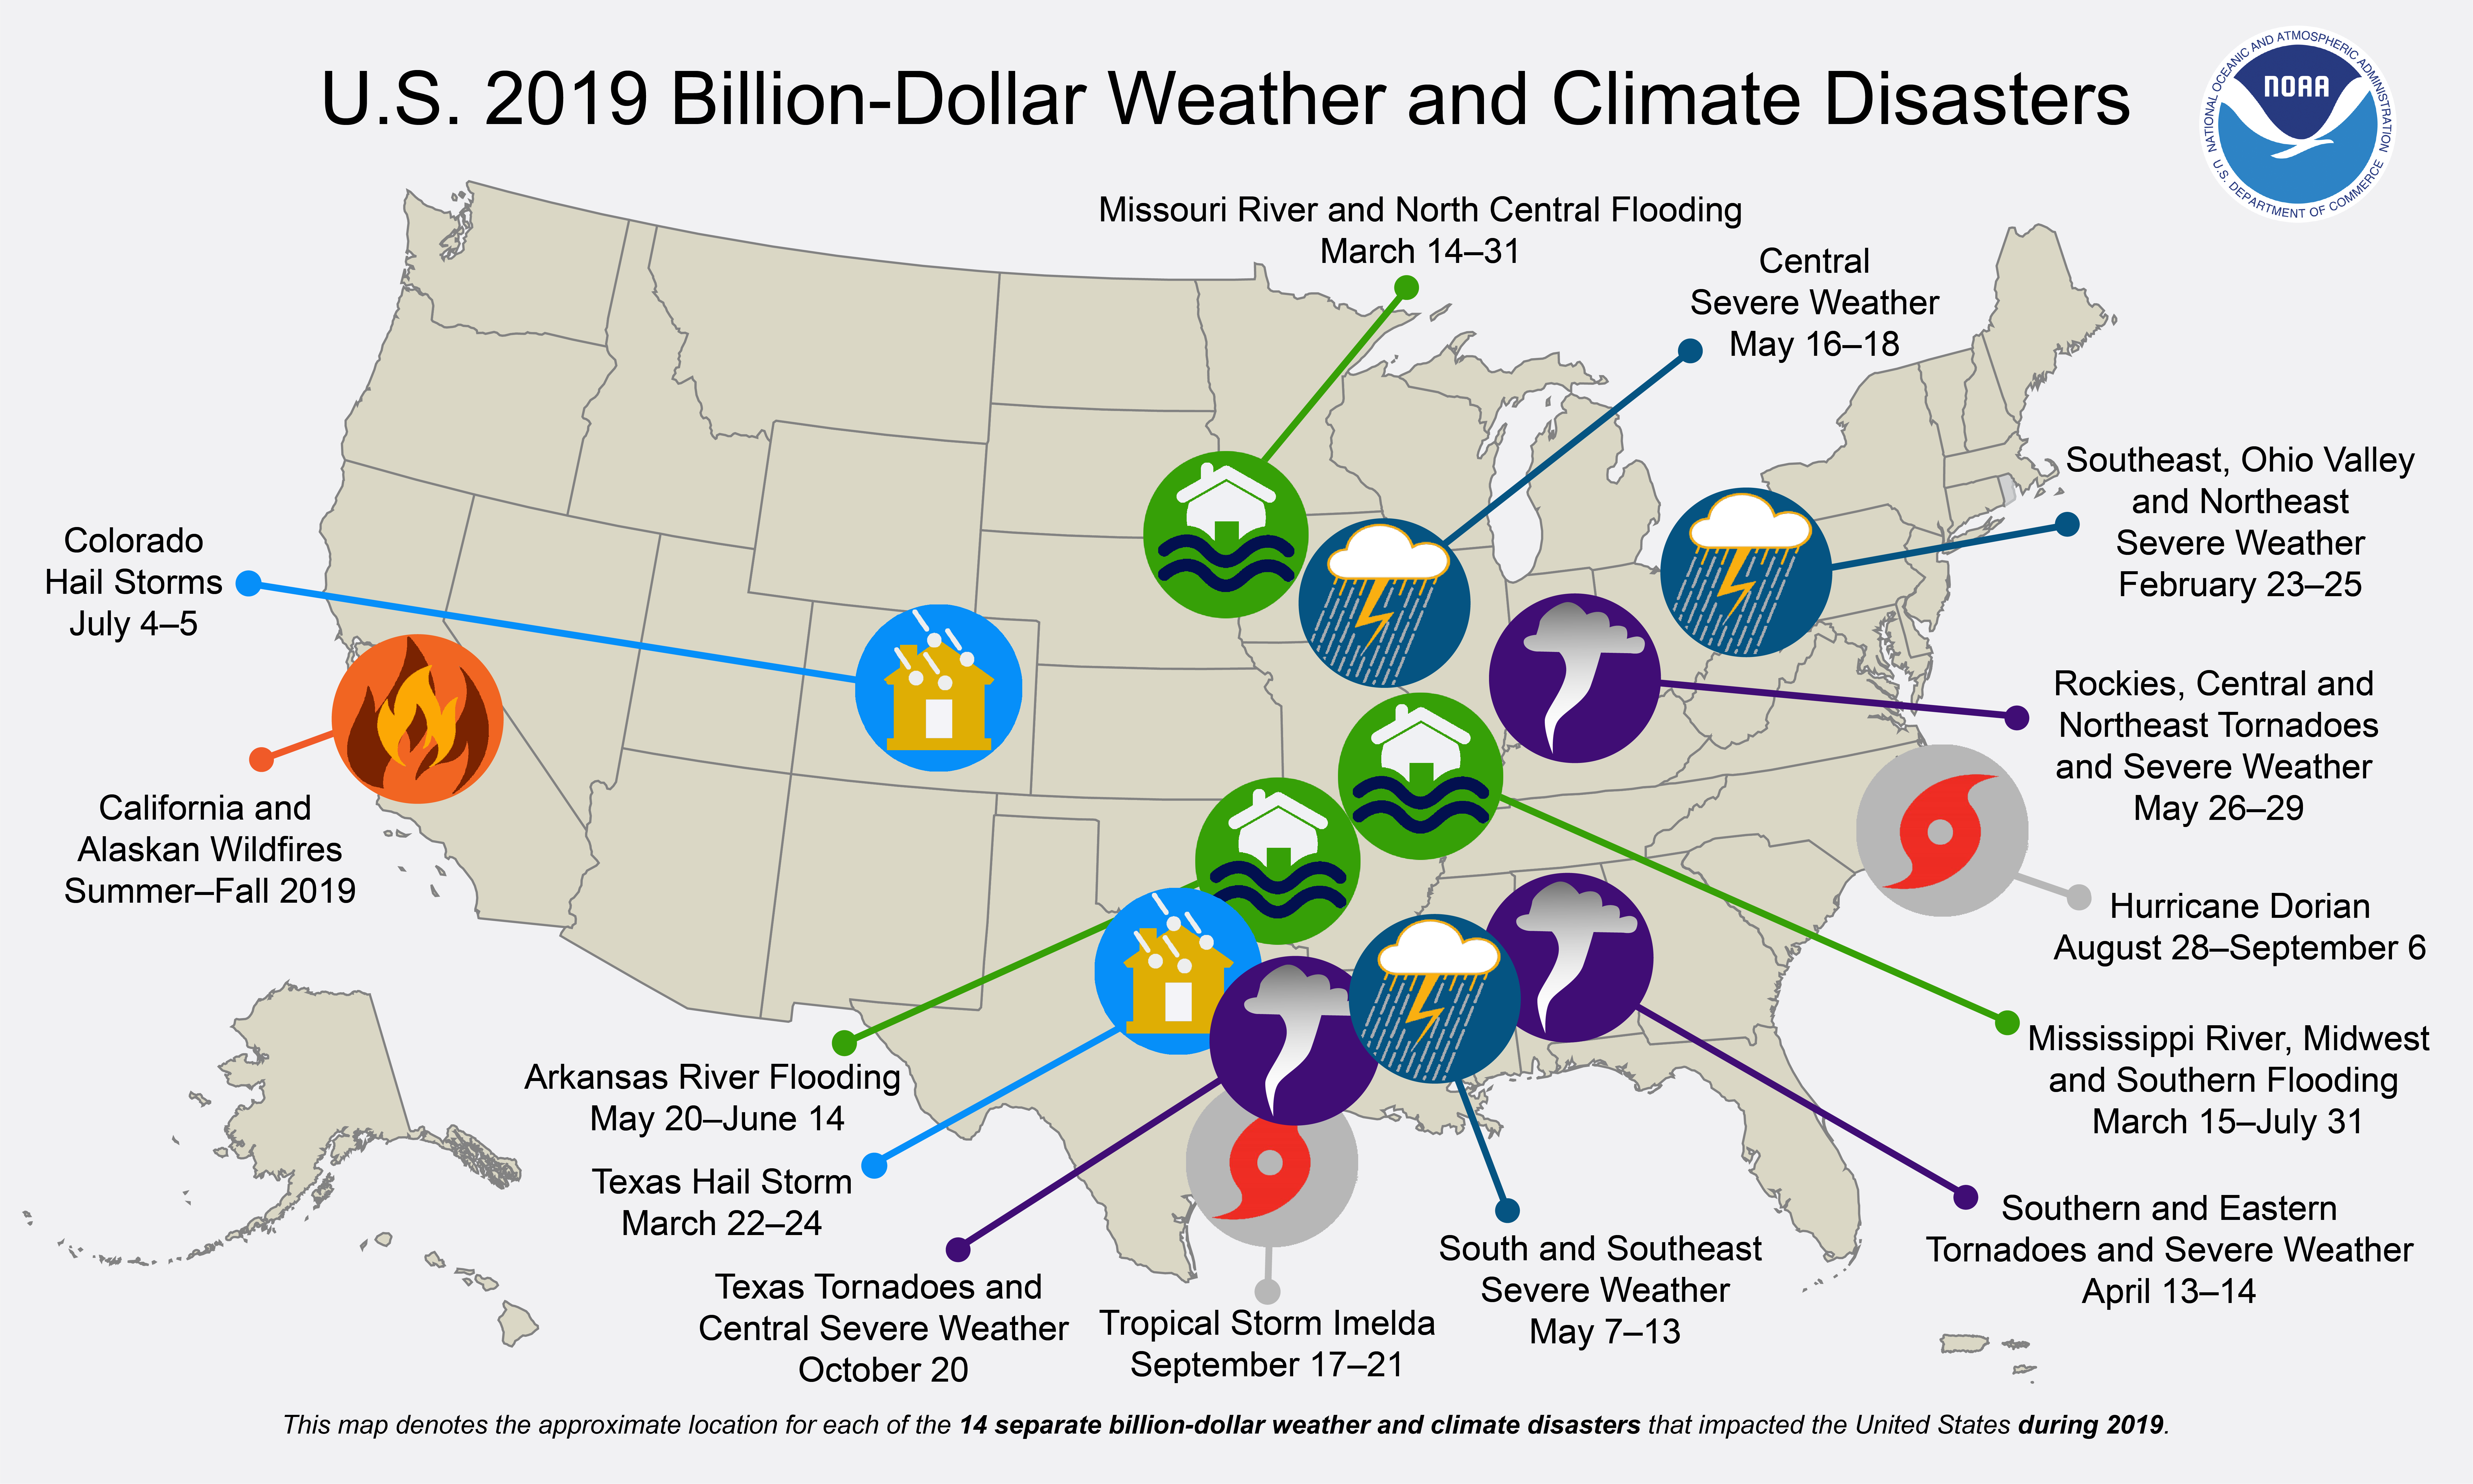 U.S. 2019 Billion-Dollar Weather and Climate Disasters